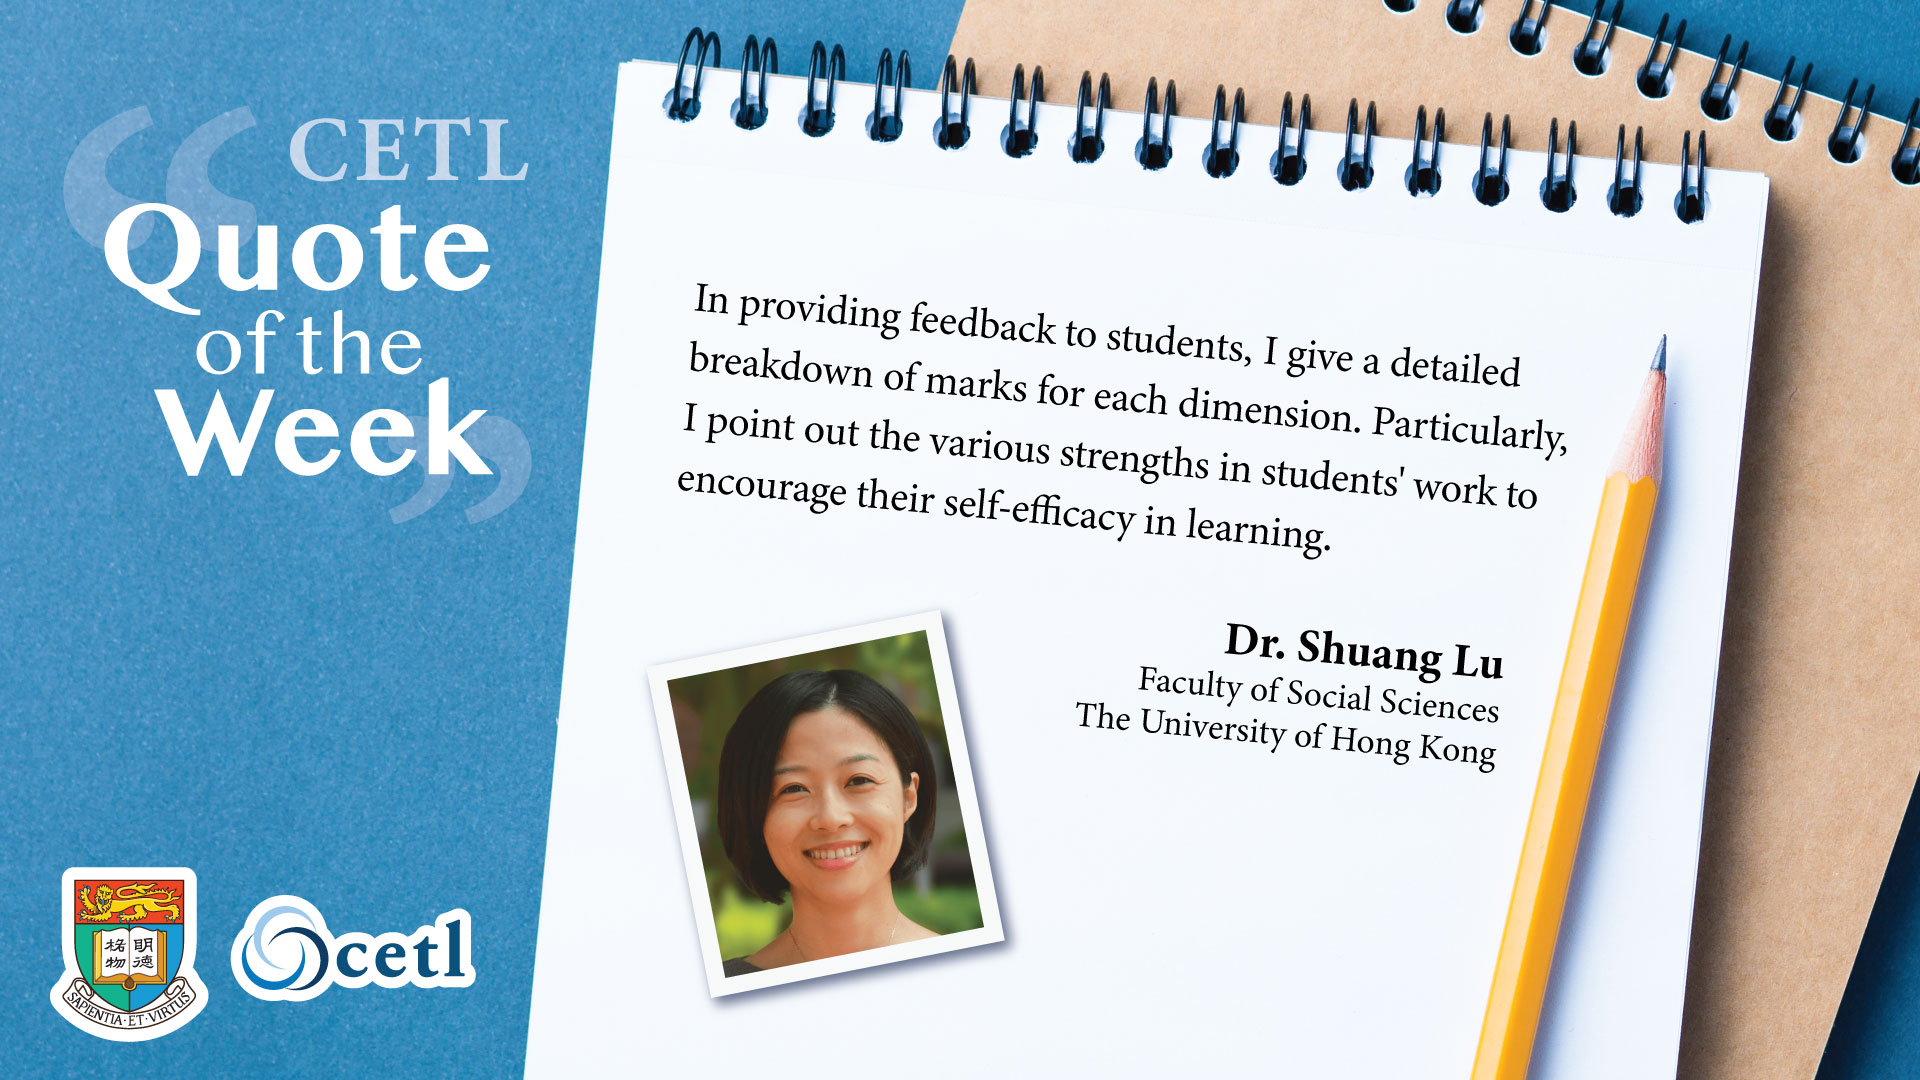 Dr. Shuang Lu - In providing feedback to students, I give a detailed breakdown of marks for each dimension. Particularly, I point out the various strengths in students' work to encourage their self-efficacy in learning.